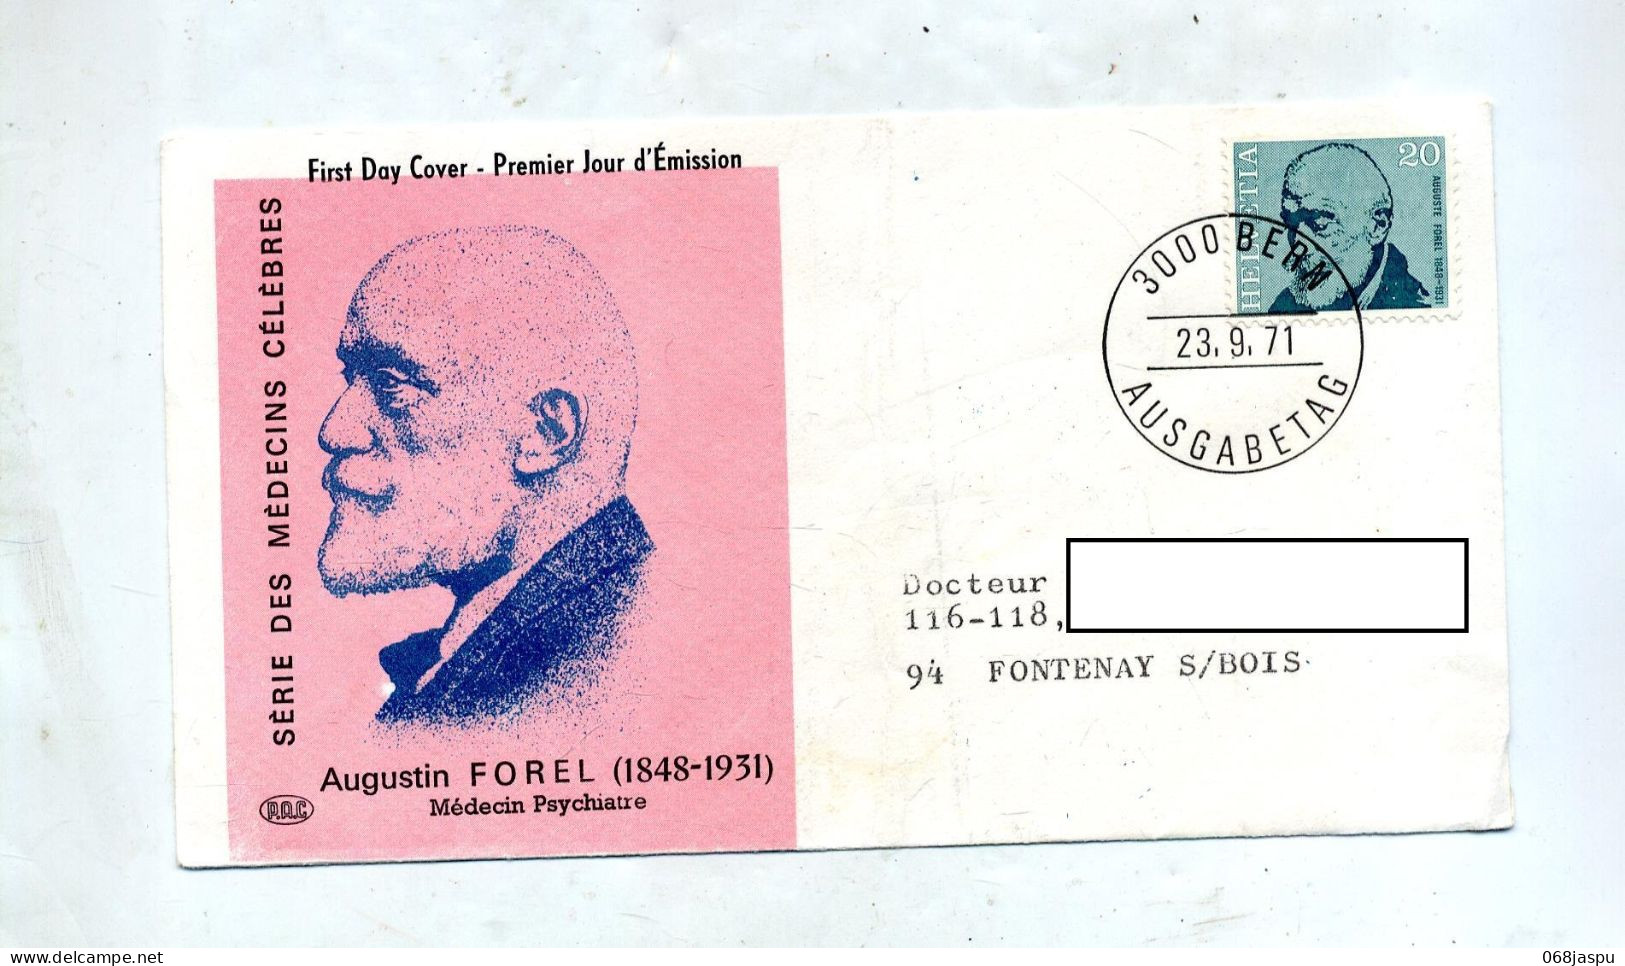 Lettre Fdc 1971 Forel Yersin Publicite Medicale - FDC